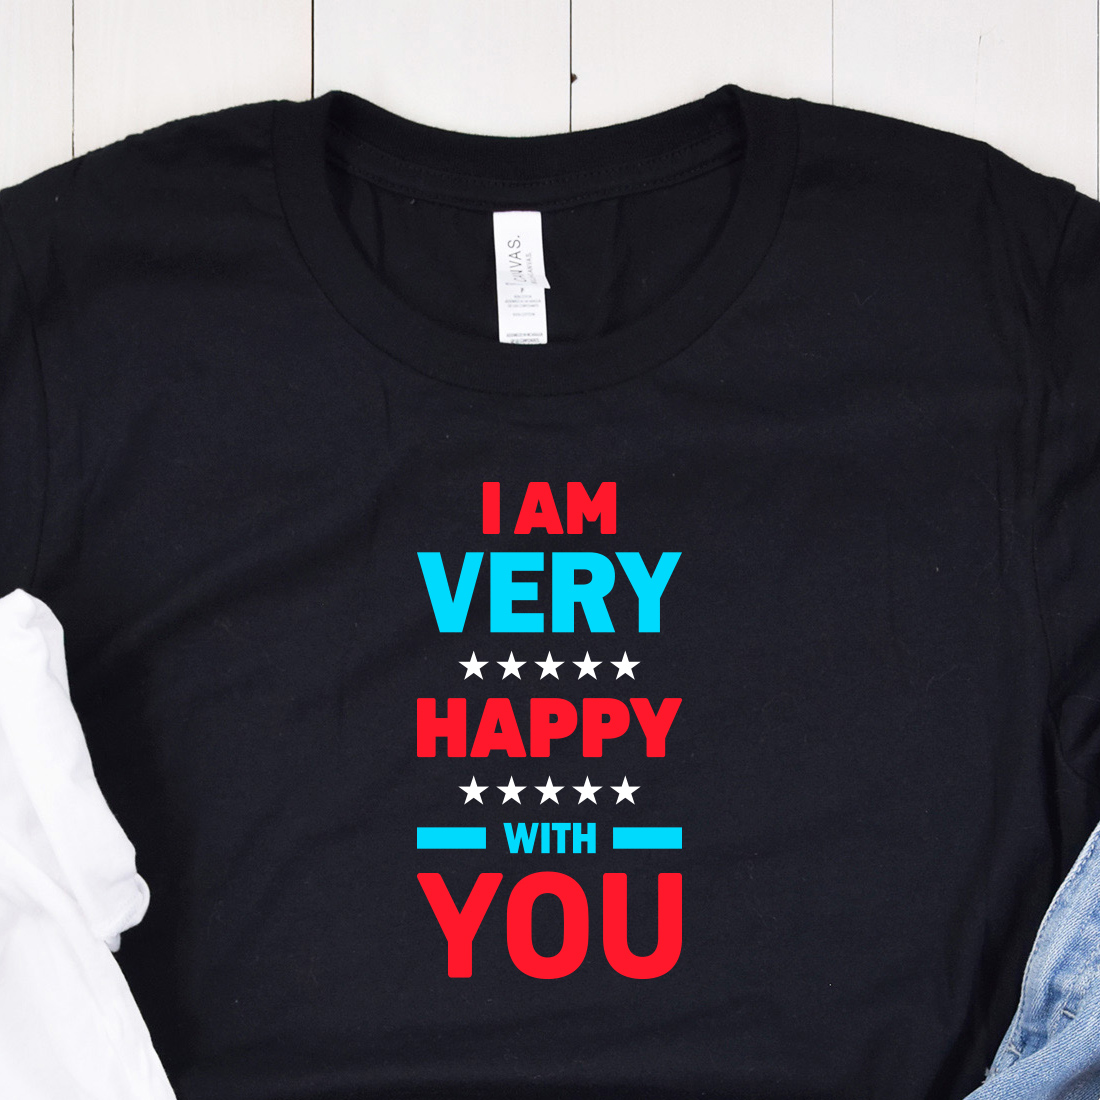 I am Very Happy with You Typography T-Shirt Design mockup preview.